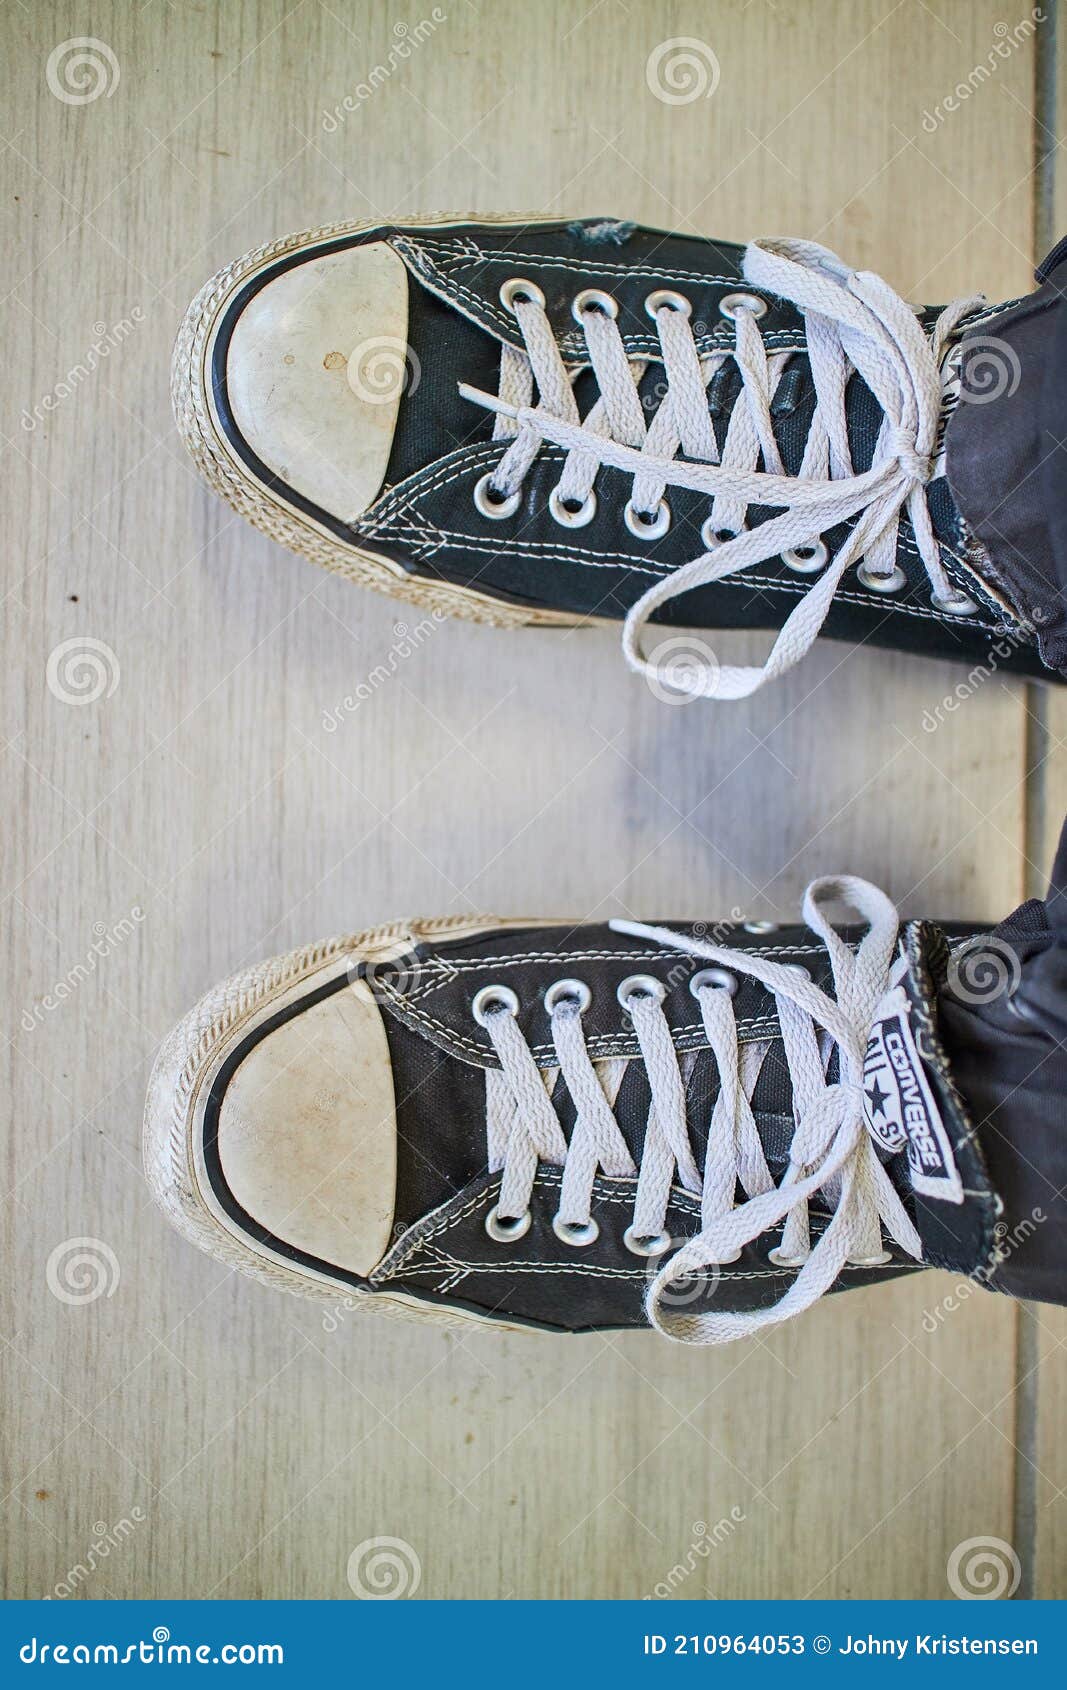 Person Wearing Black Dirty Shoes Stock Image - of shop, walk: 210964053